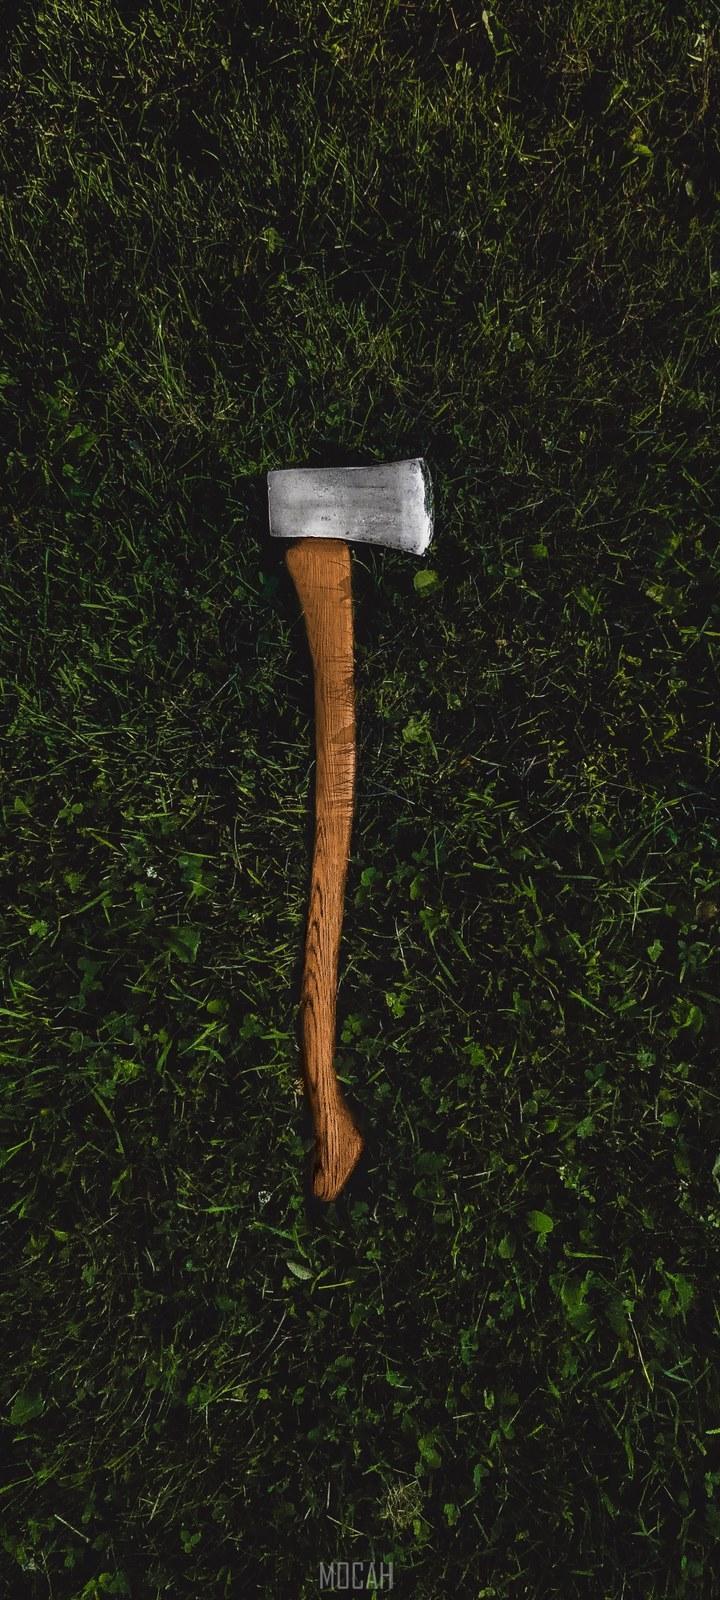 HD wallpaper, A Cut Above, A Metal Ax With A Wooden Handle Laid Down In The Middle Of A Grassy Ground, Infinix Hot 8 Wallpaper Download, 720X1600